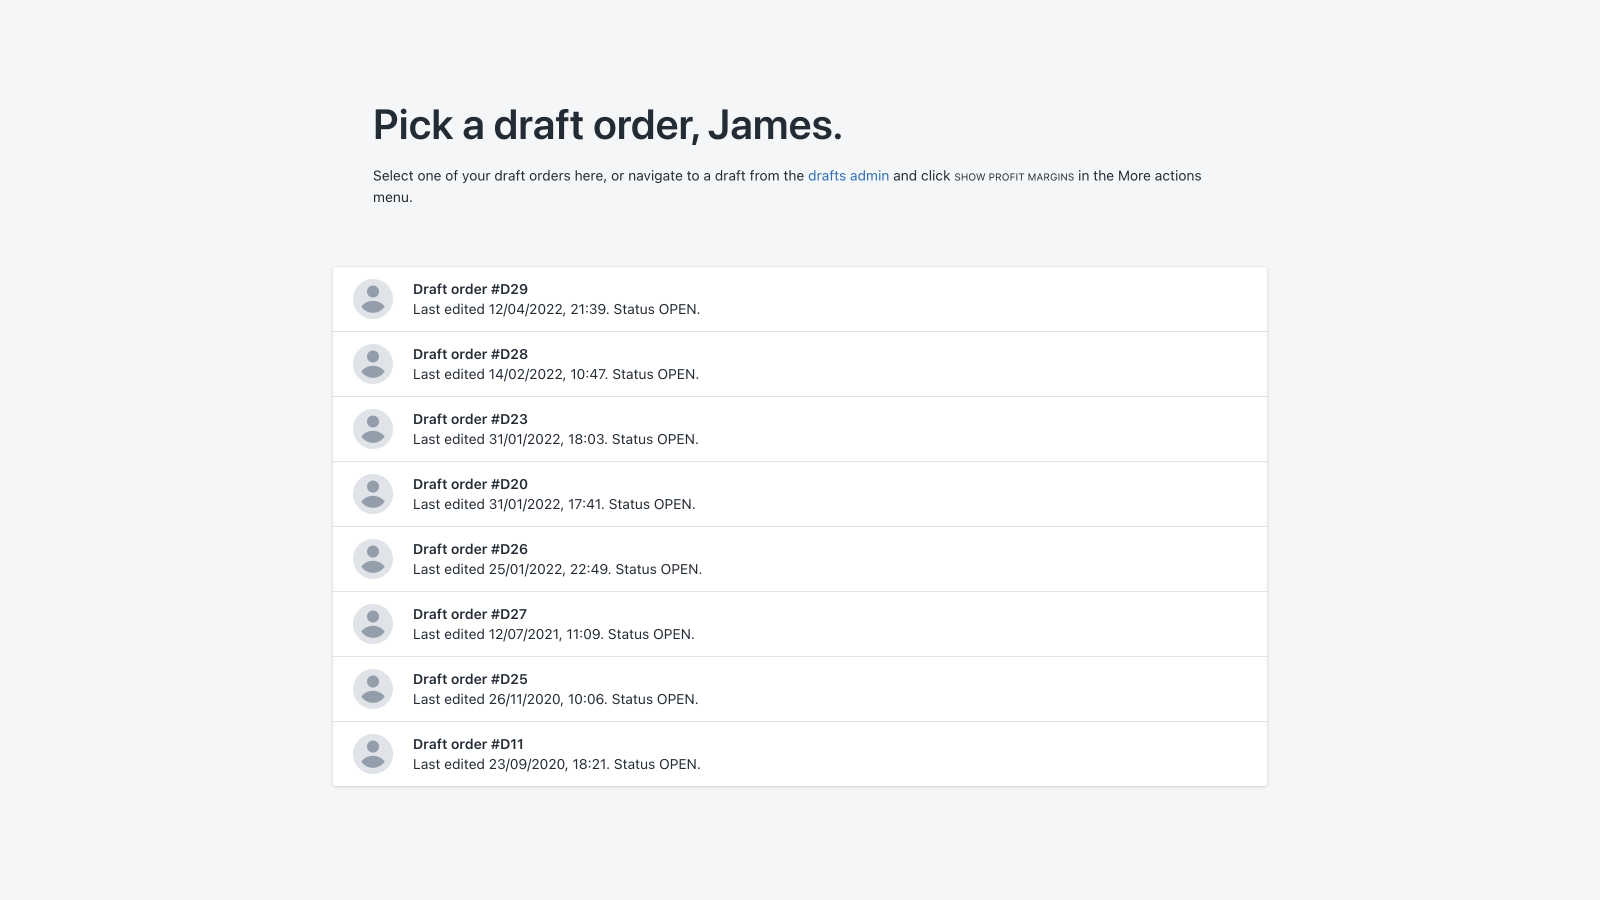 Picking a draft order to calculate profit margins for in Shopify